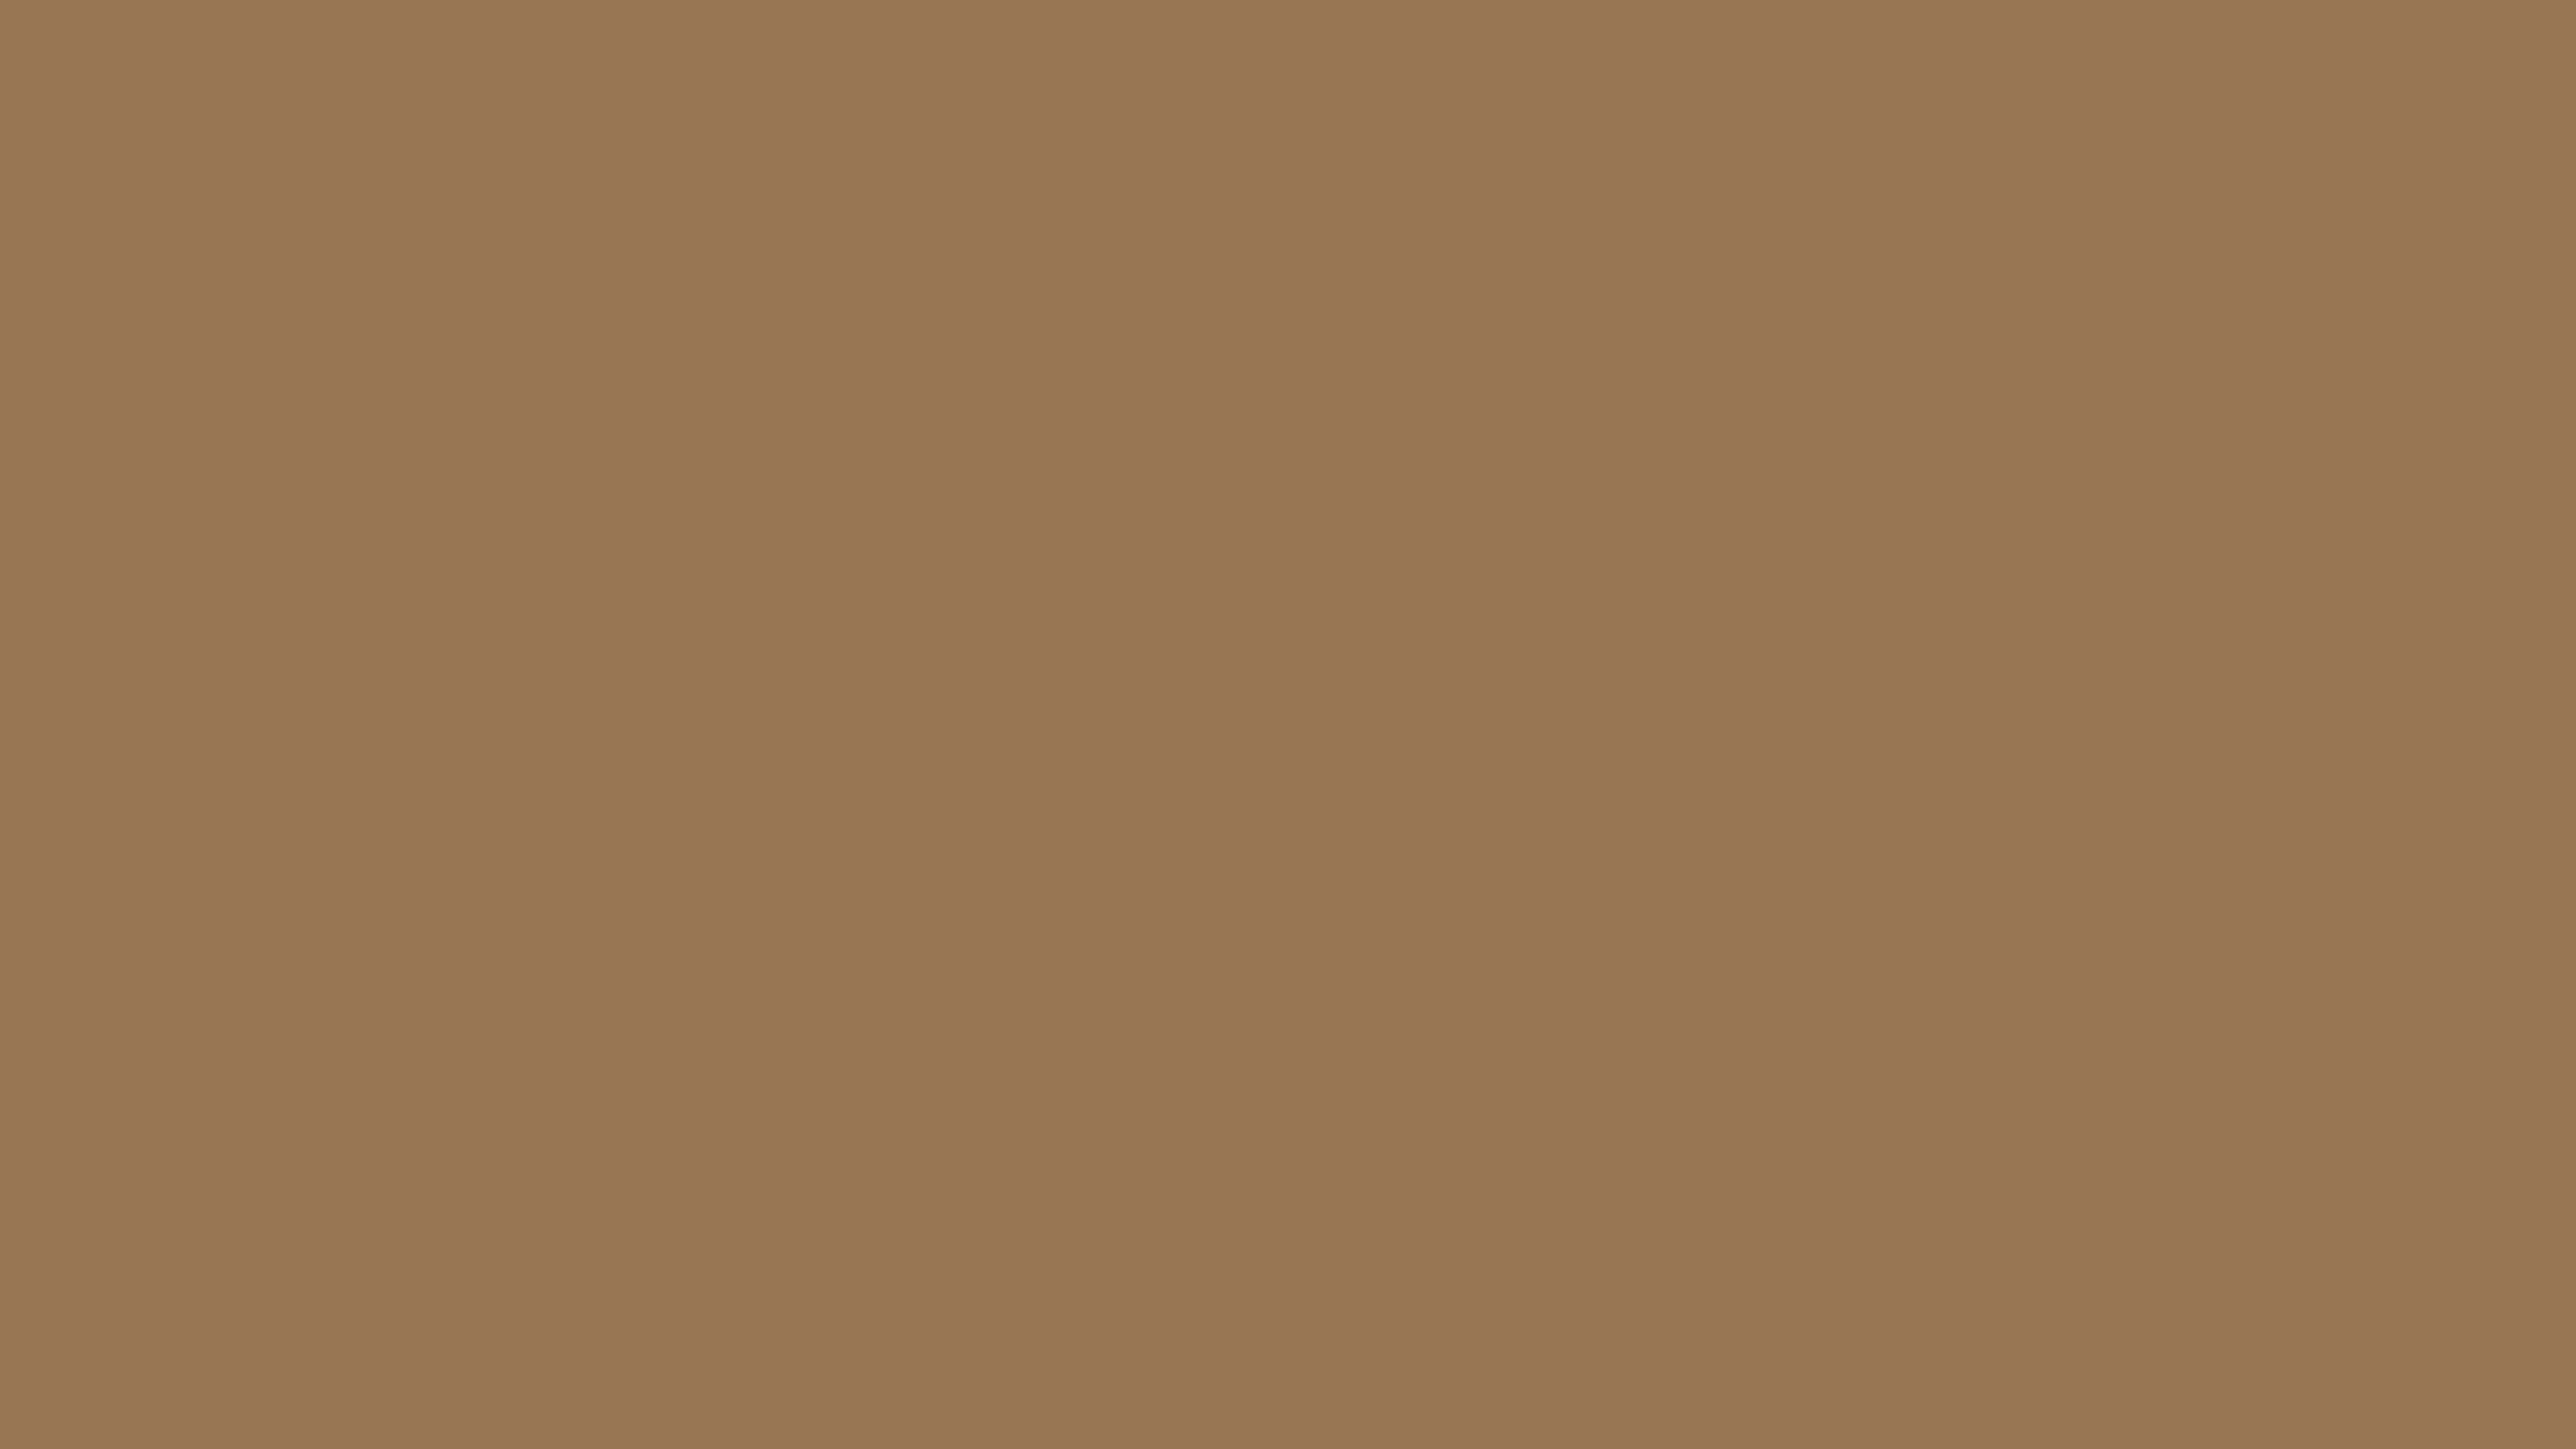 7680x4320 Pale Brown Solid Color Background